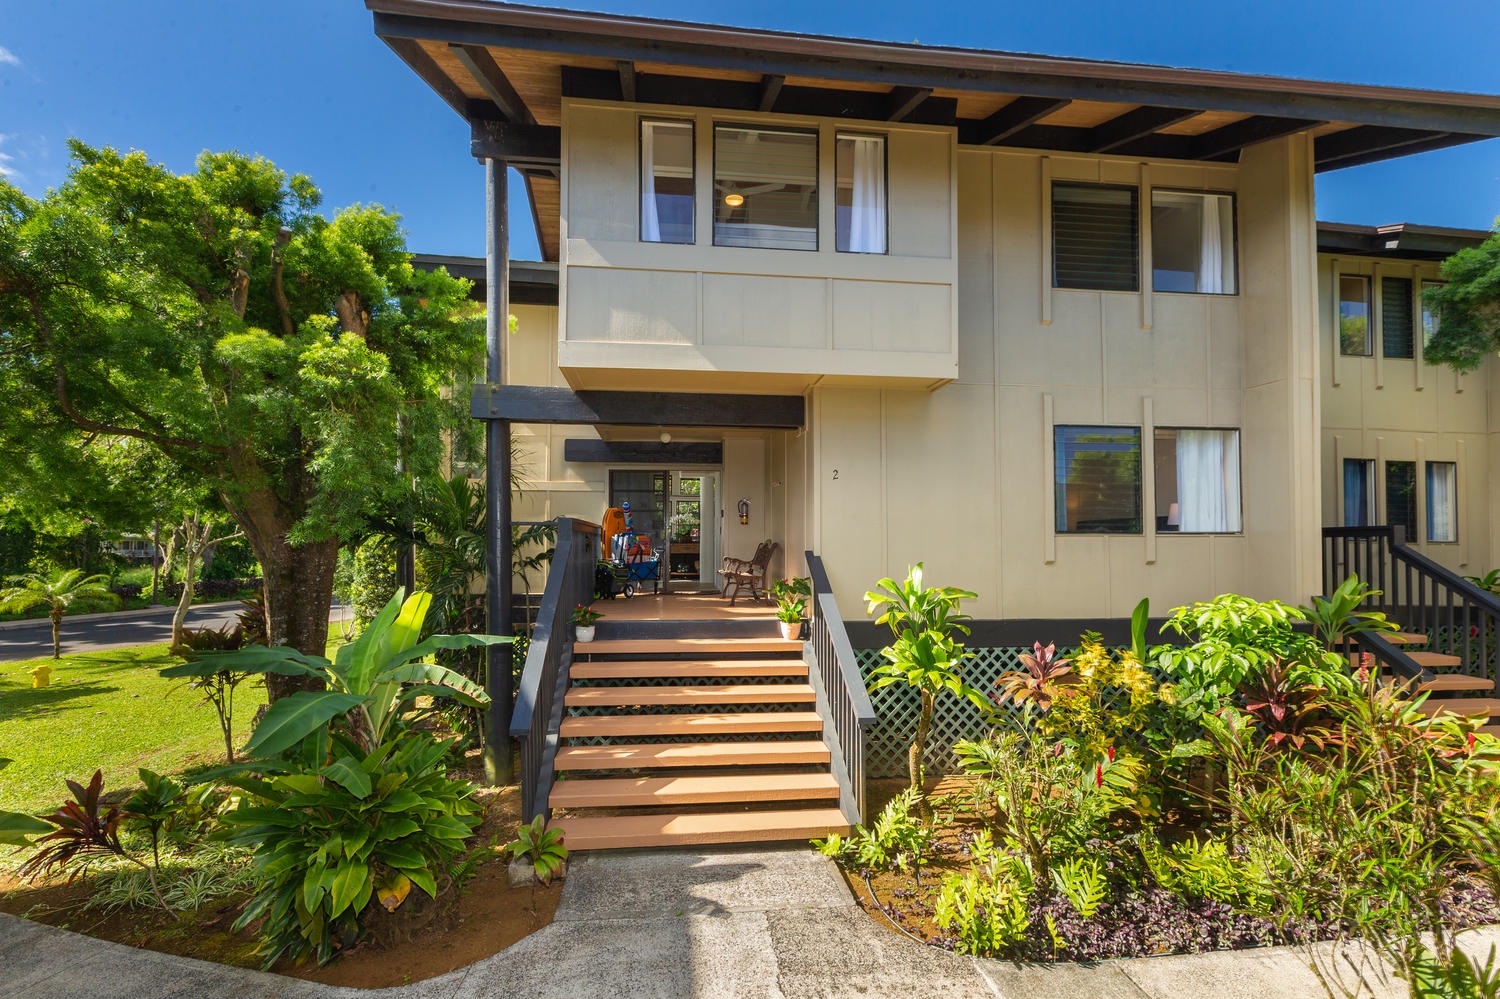 Princeville Vacation Rentals, Mauna Kai 2 - The front entry of the condo